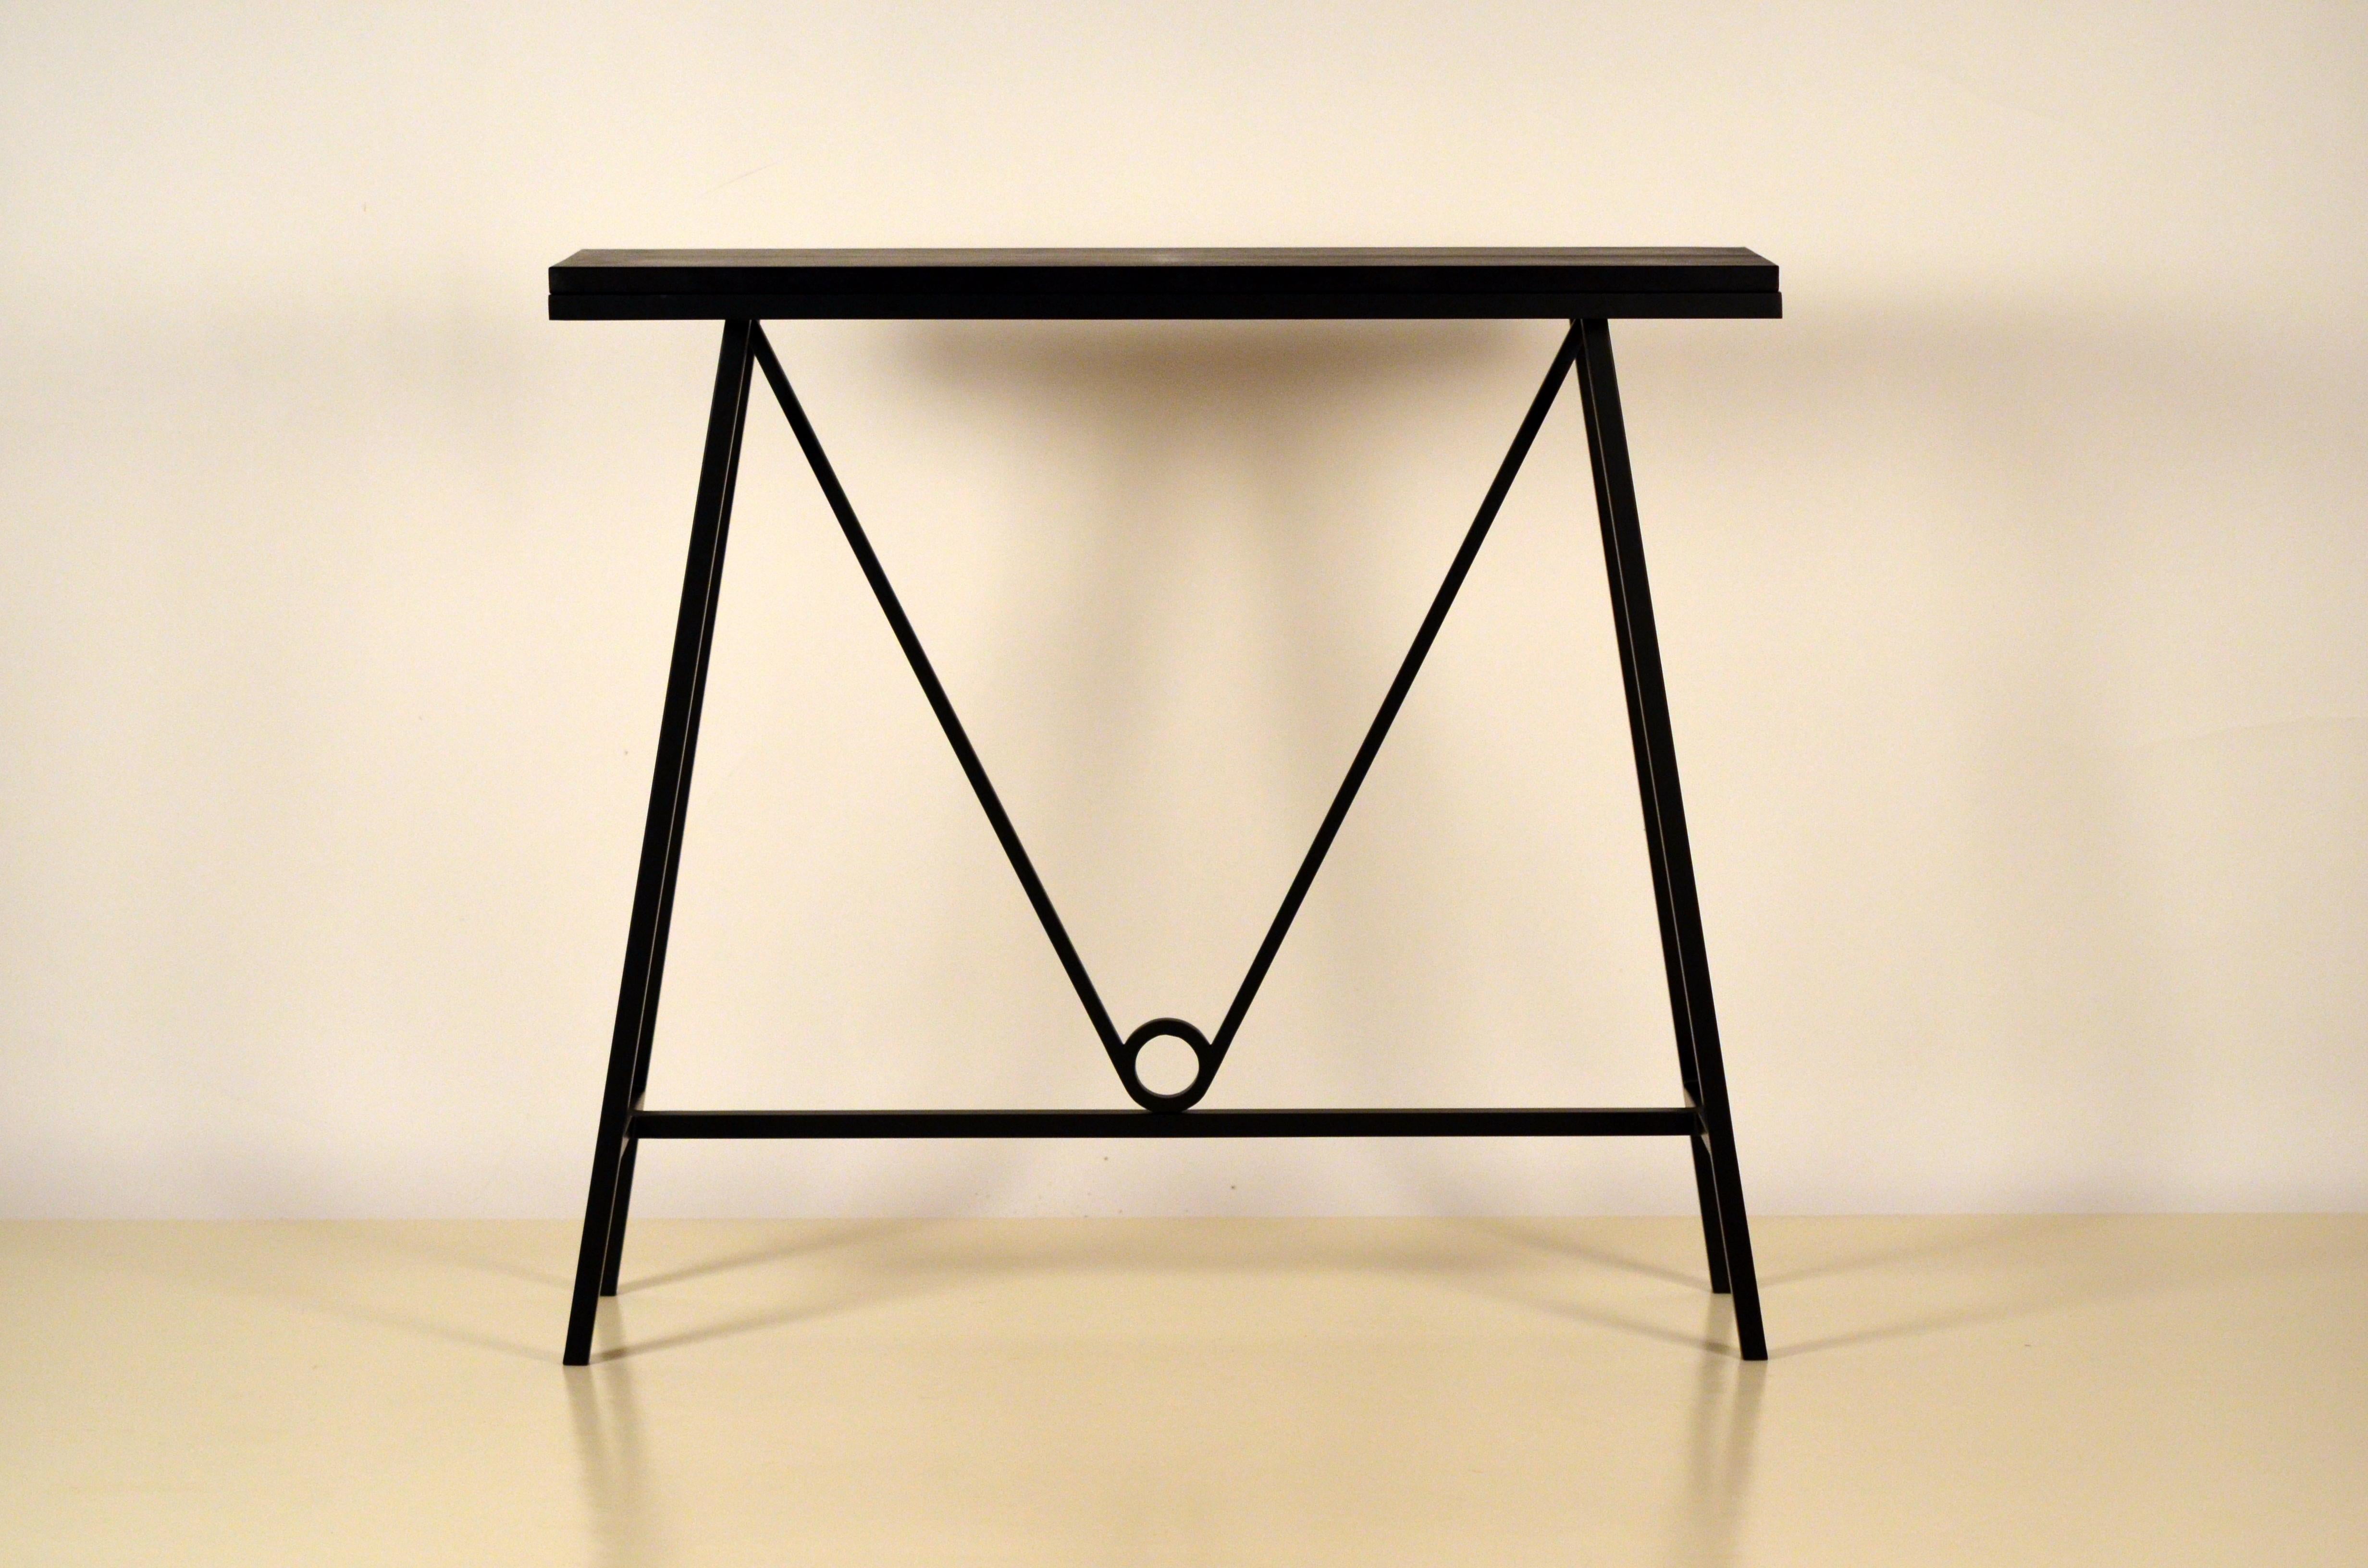 Pair of 'Trapèze' blackened steel and goatskin consoles by Design Frères.